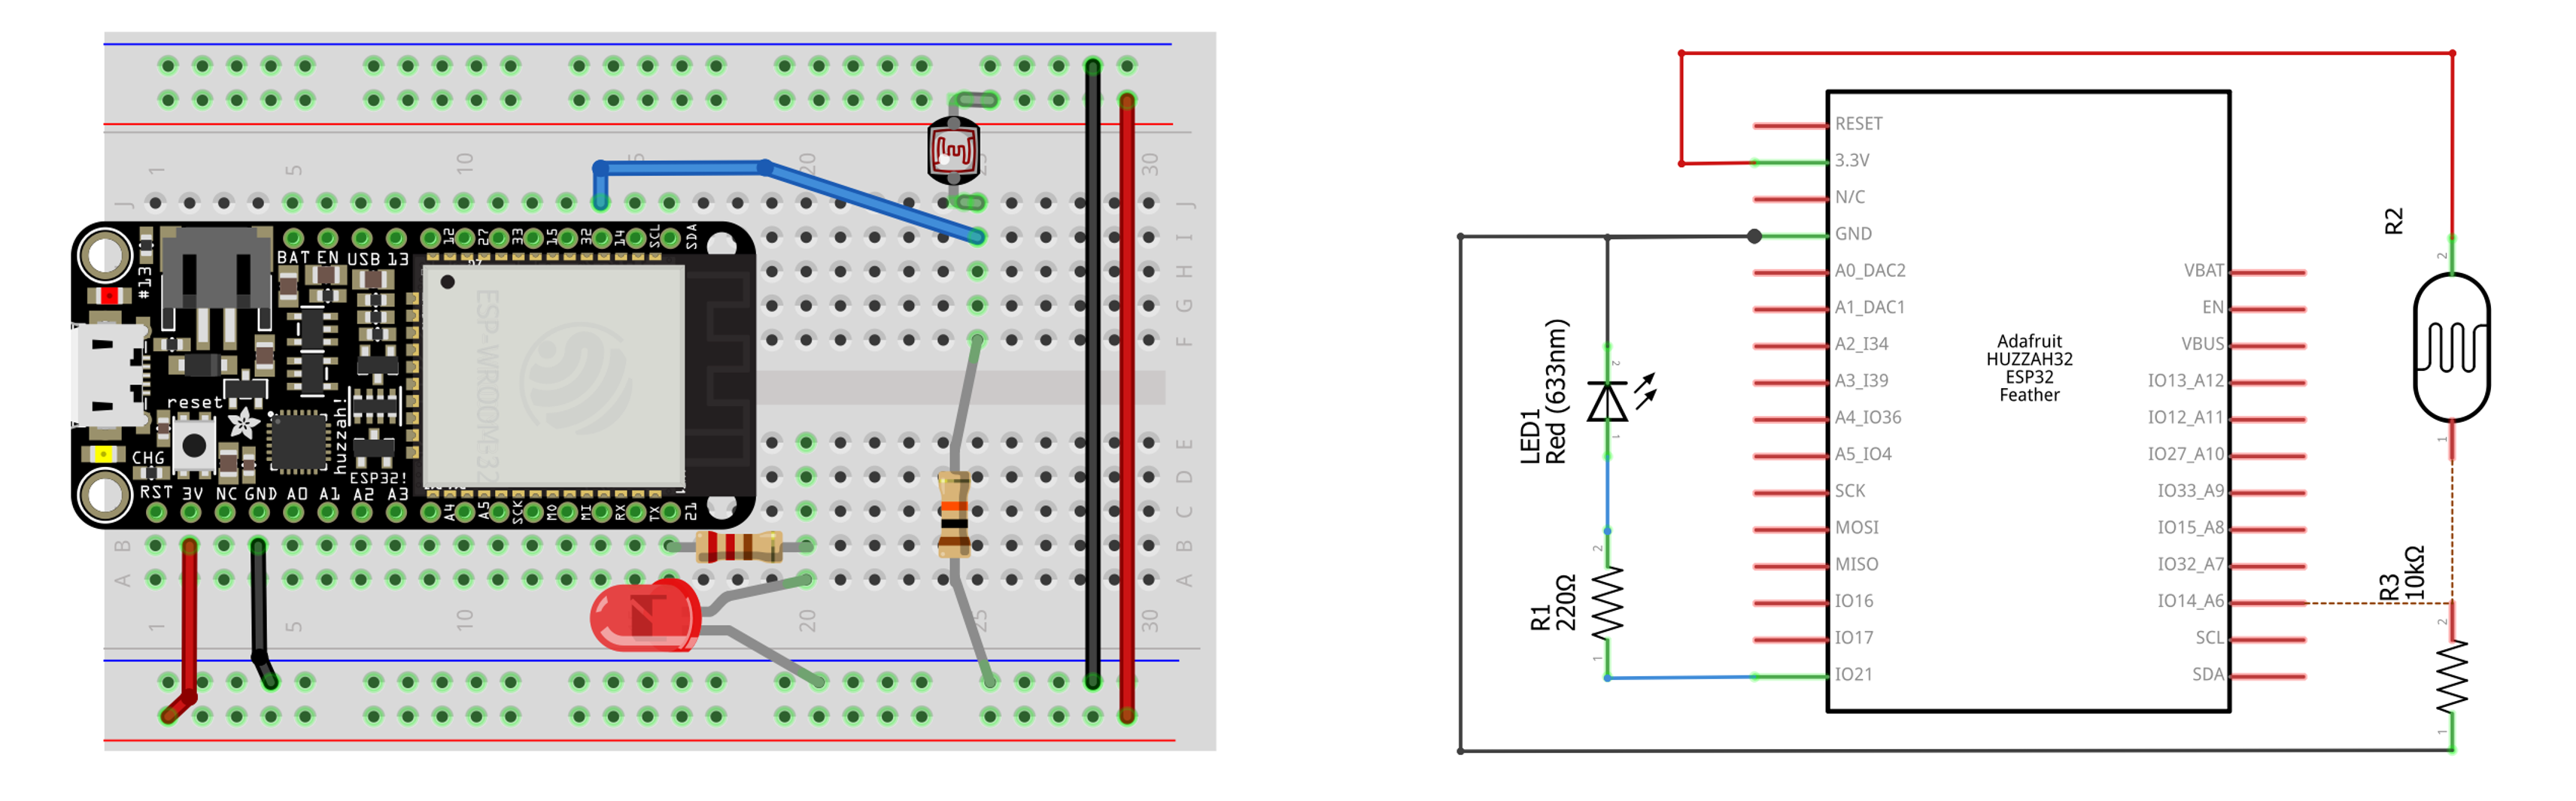 Circuit diagram and schematic for LED photoresistor circuit with Huzzah32